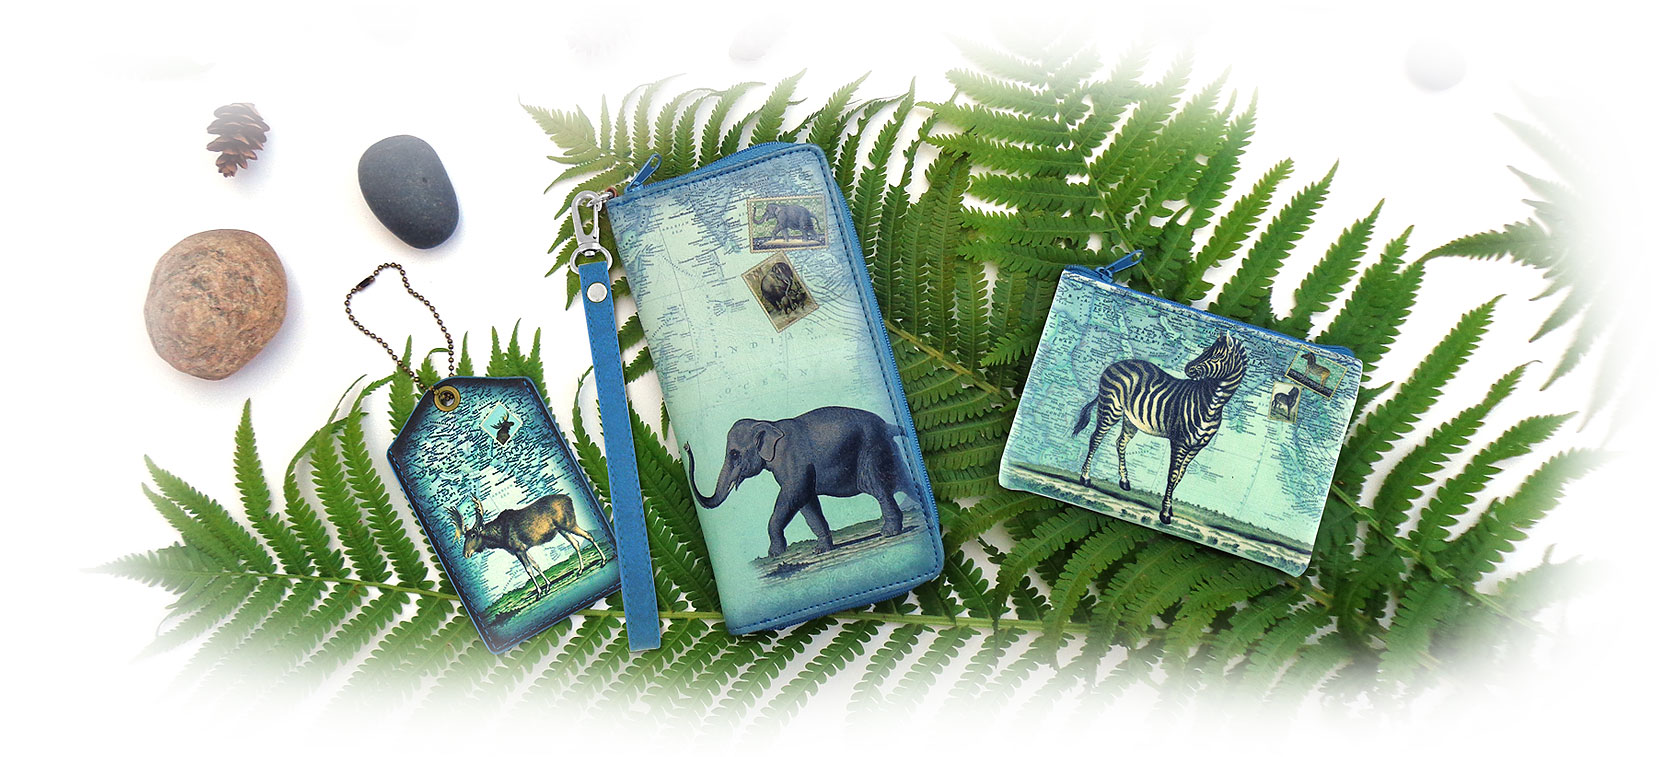 LAVISHY design & wholesale animal themed vegan accessories & gfits to gift shops, boutiques & book stores in Canada, USA & worldwide.